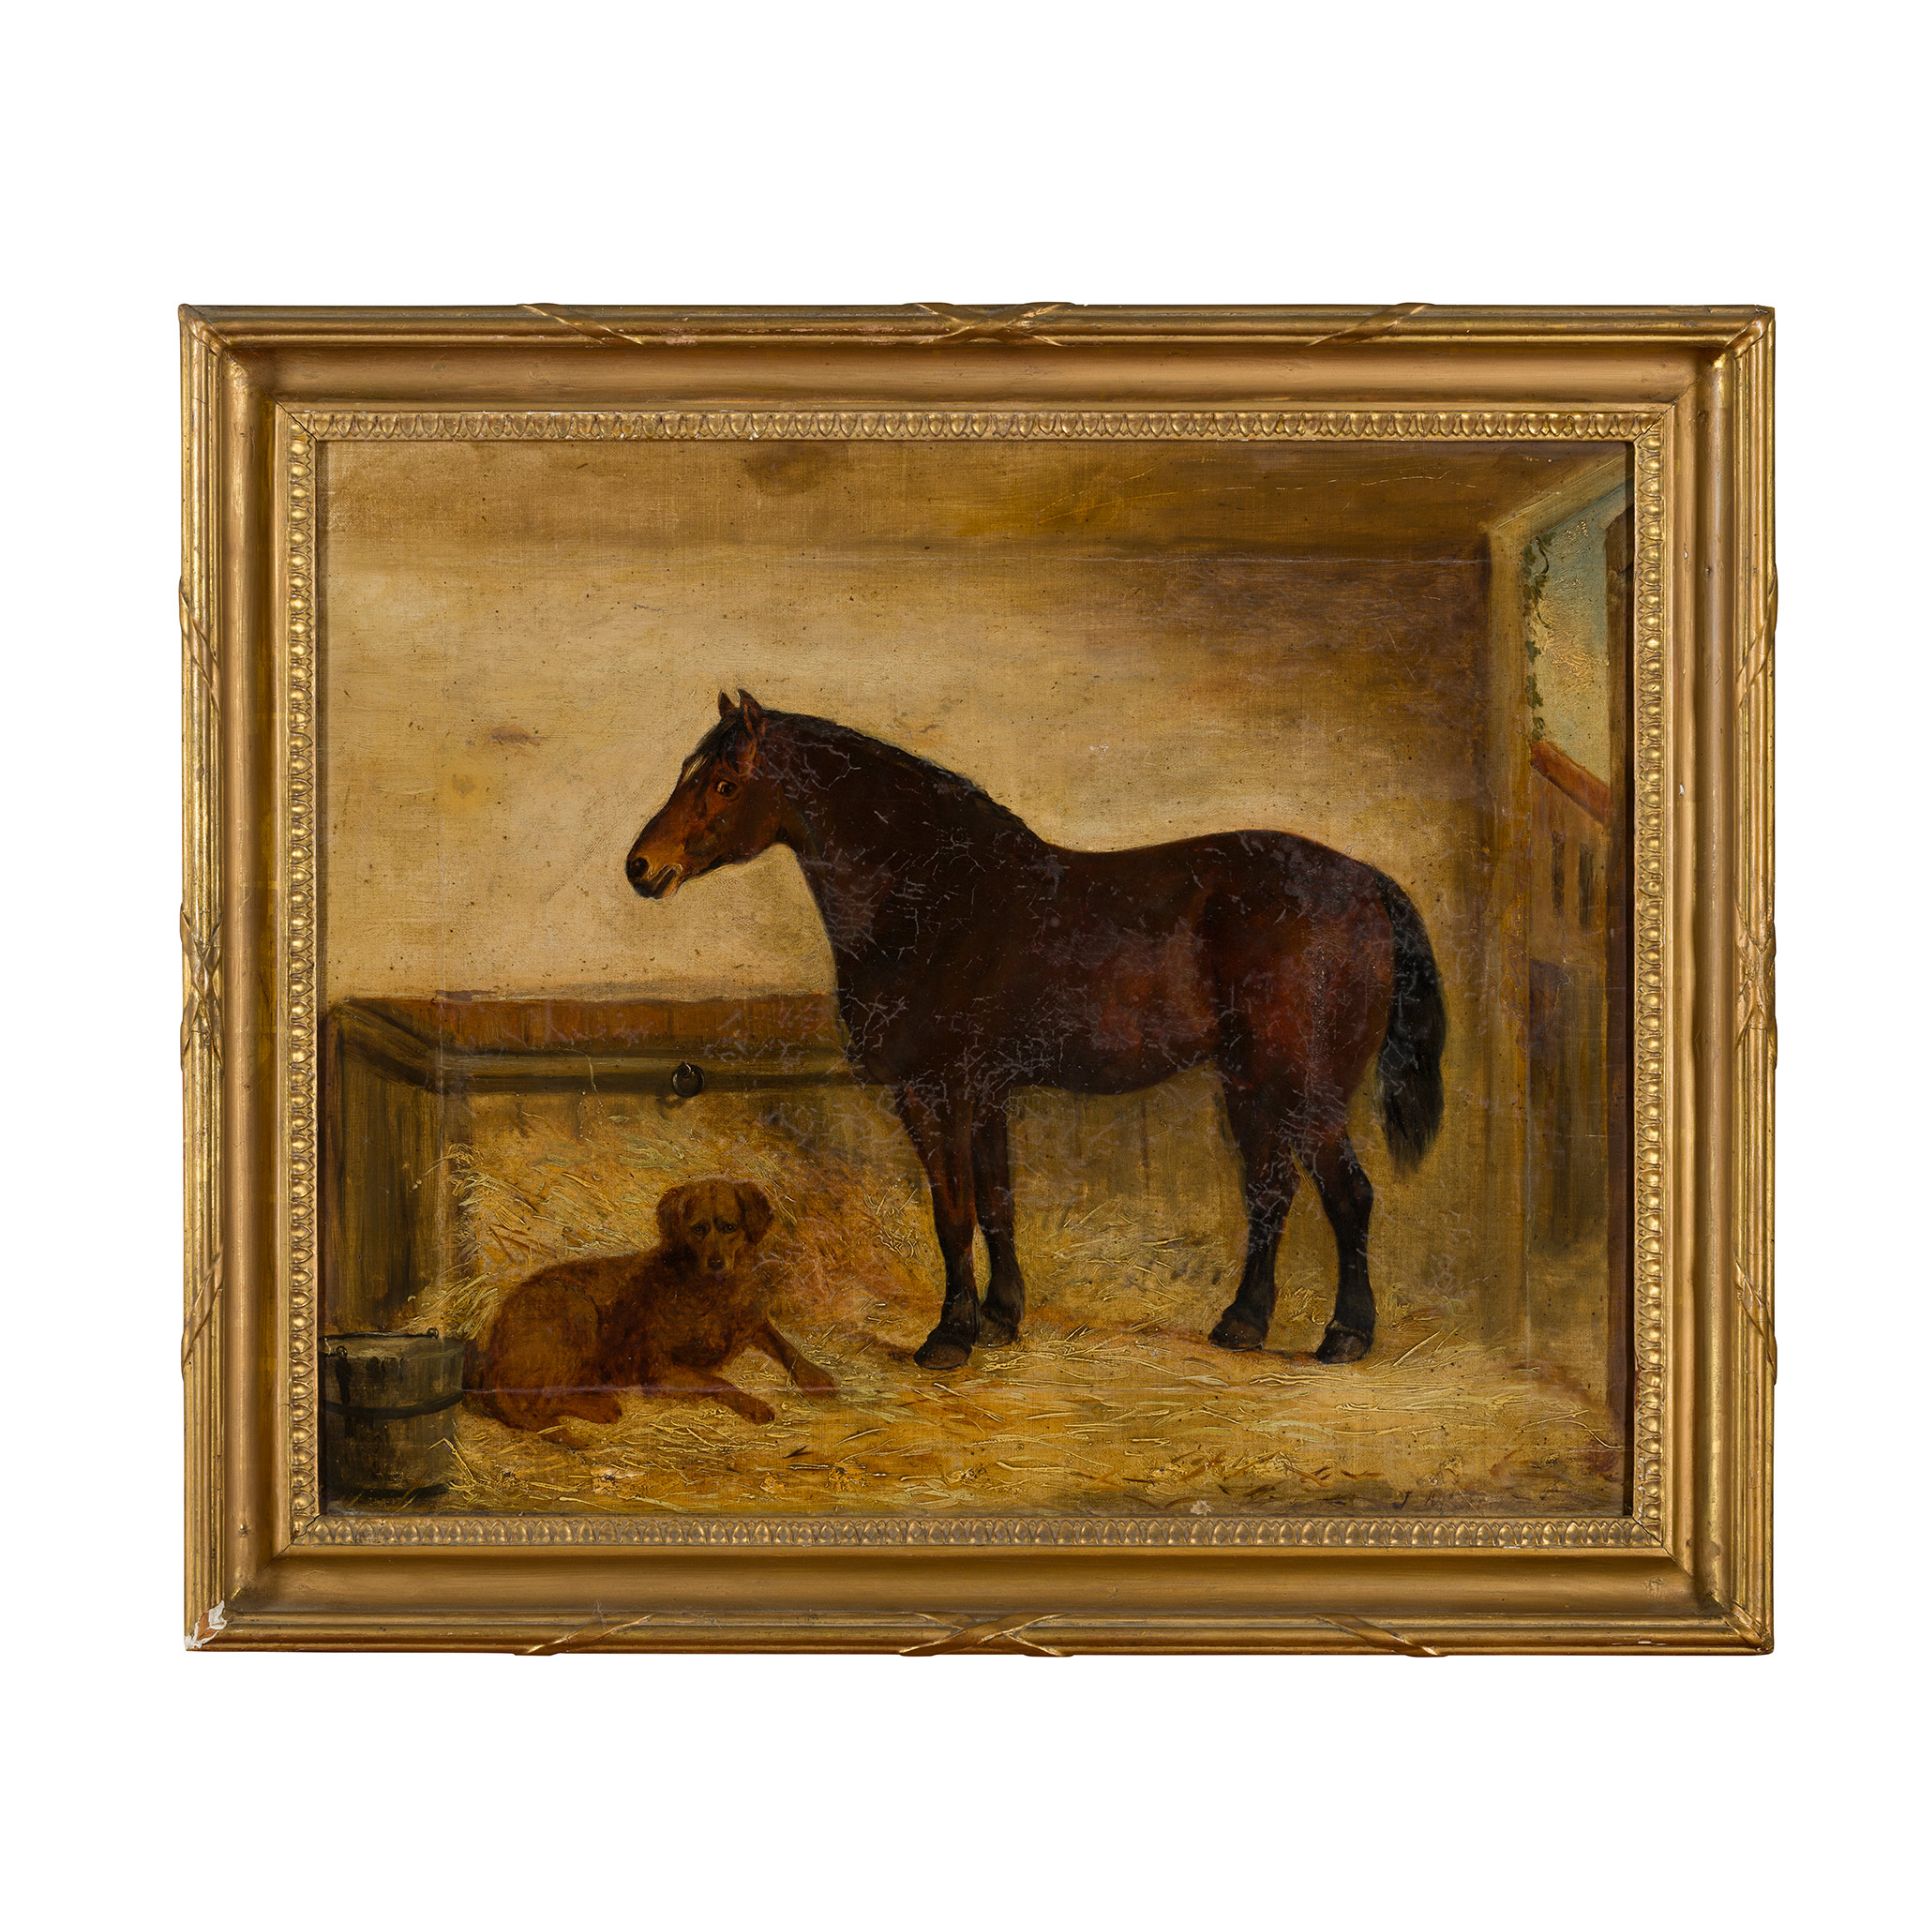 19TH CENTURY ENGLISH SCHOOL DARK BAY COB WITH A RETREIVER IN A STABLE - Image 2 of 2